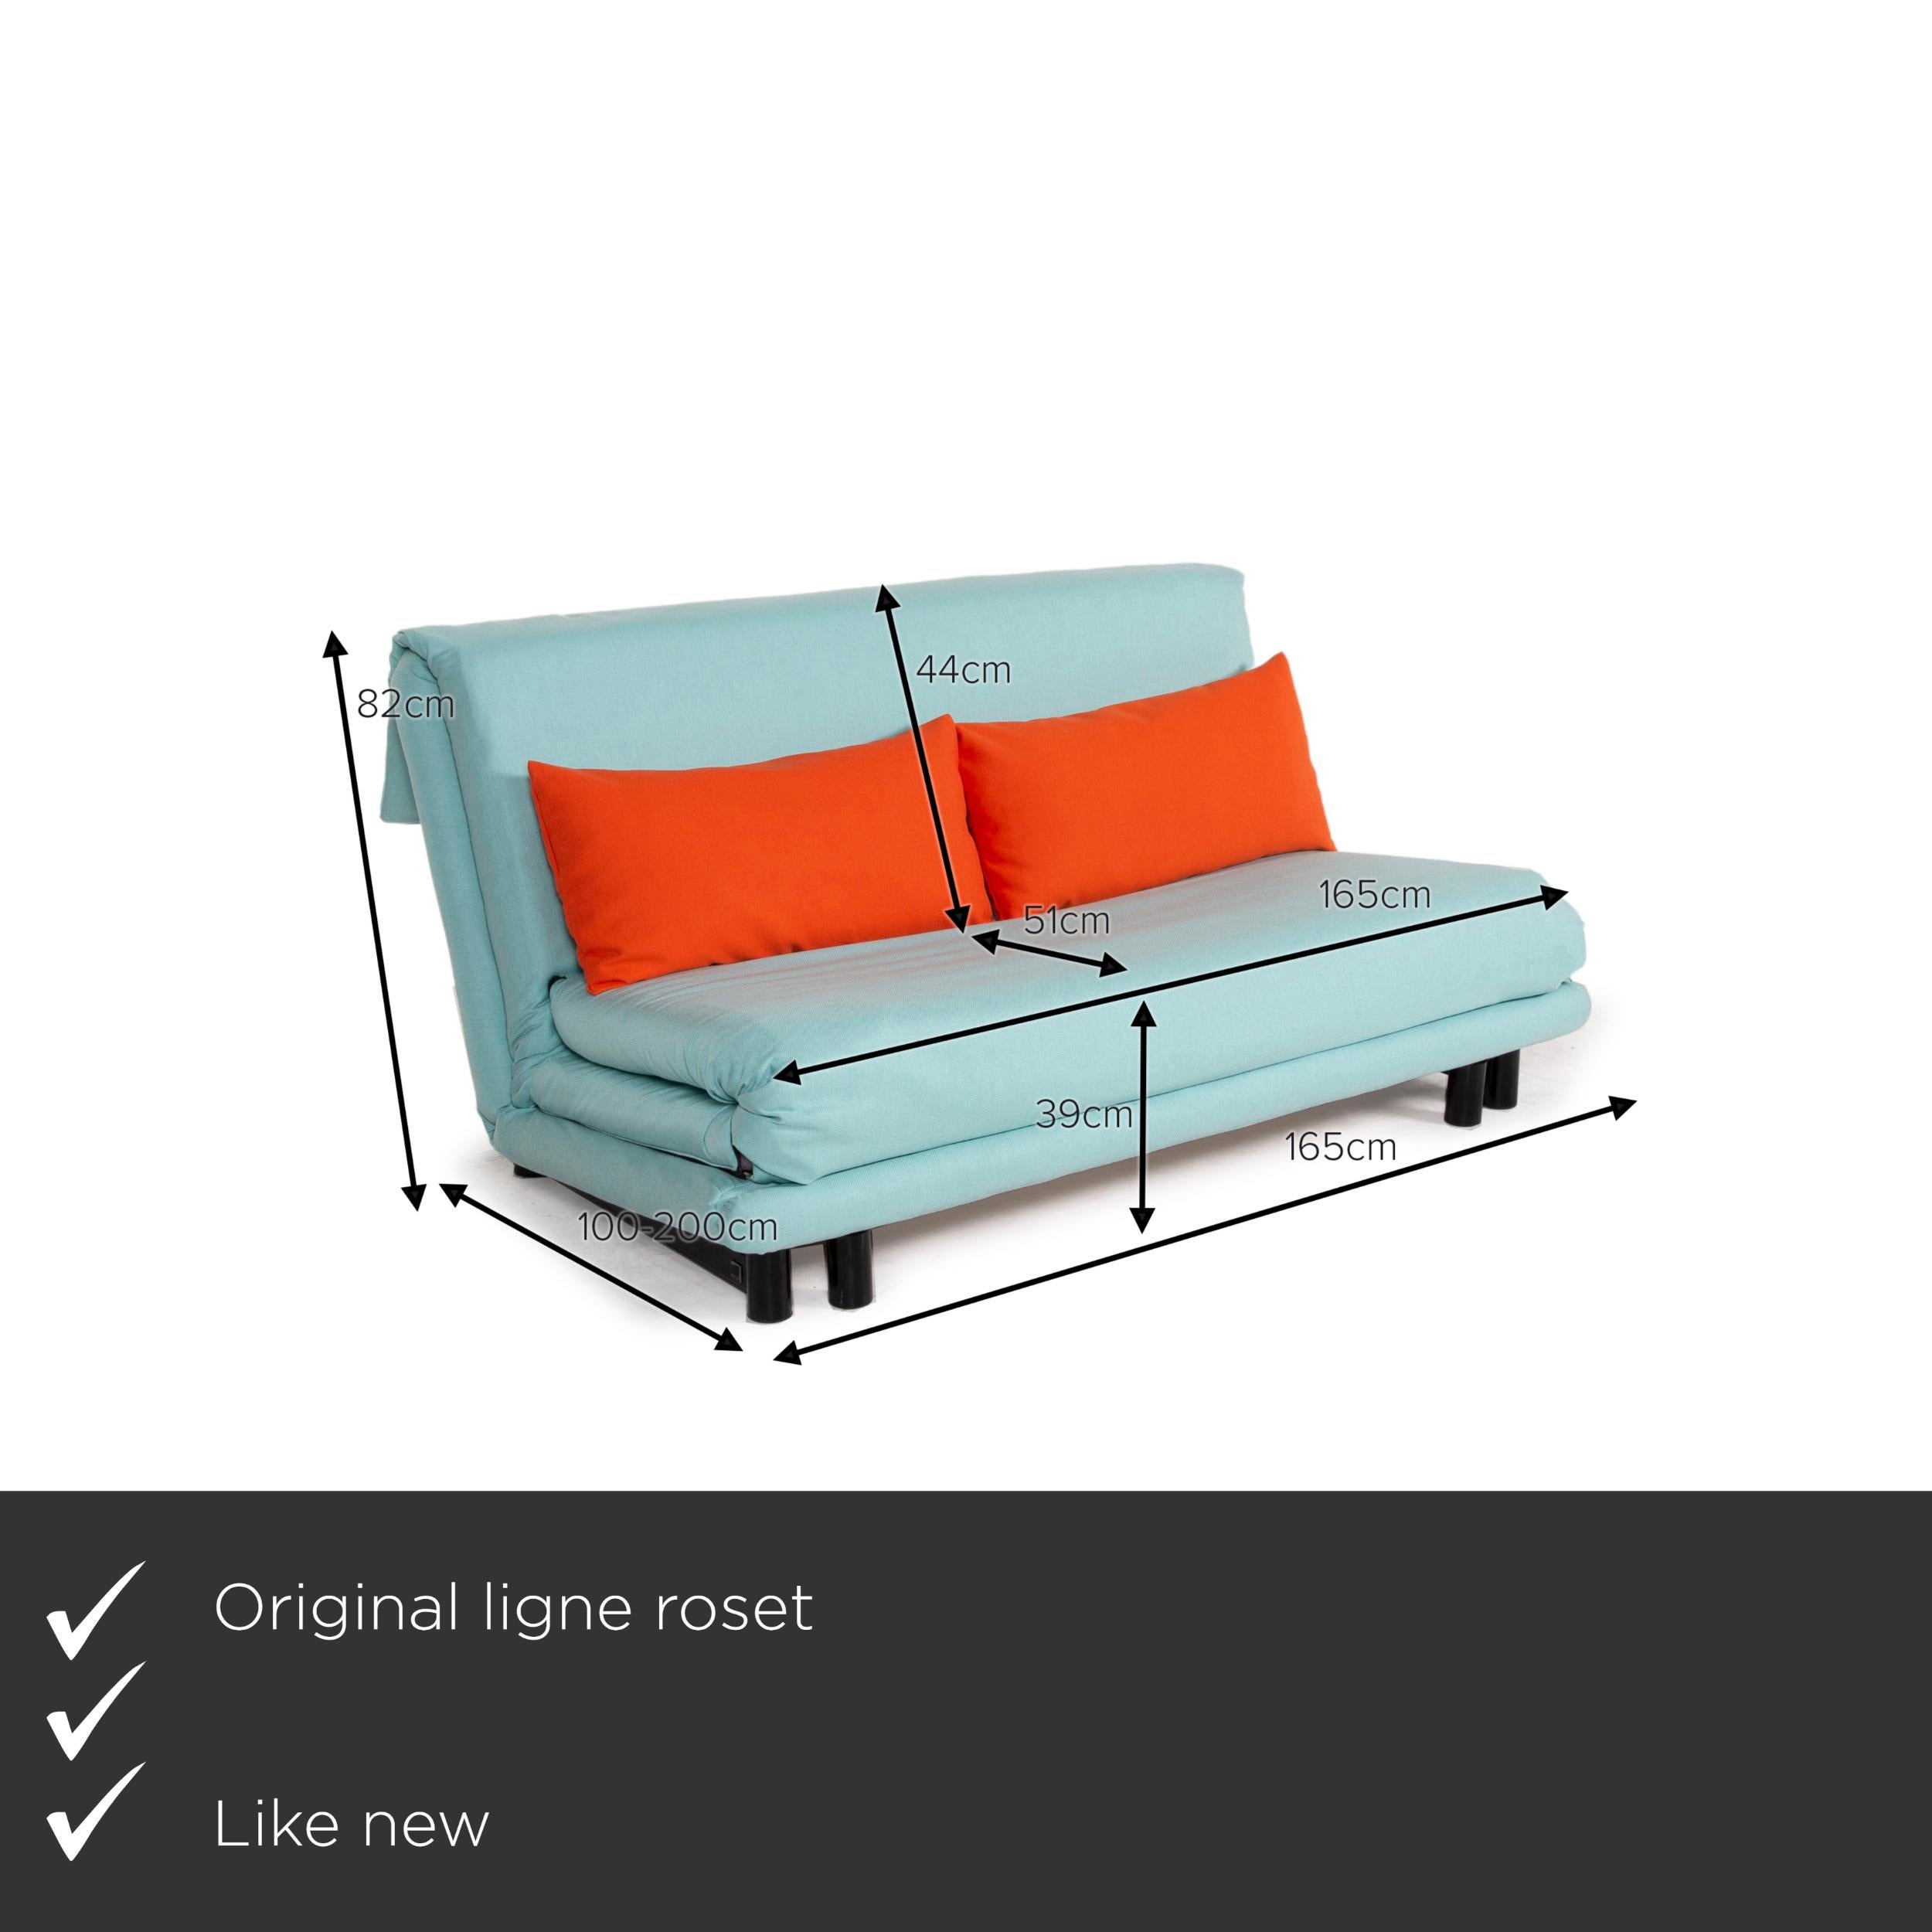 We present to you a ligne roset Multy fabric sofa blue three-seater sleeping function new cover.

 

 Product measurements in centimeters:
 

Depth 100
Width 165
Height 82
Seat height 39
Rest height
Seat depth 51
Seat width 165
Back